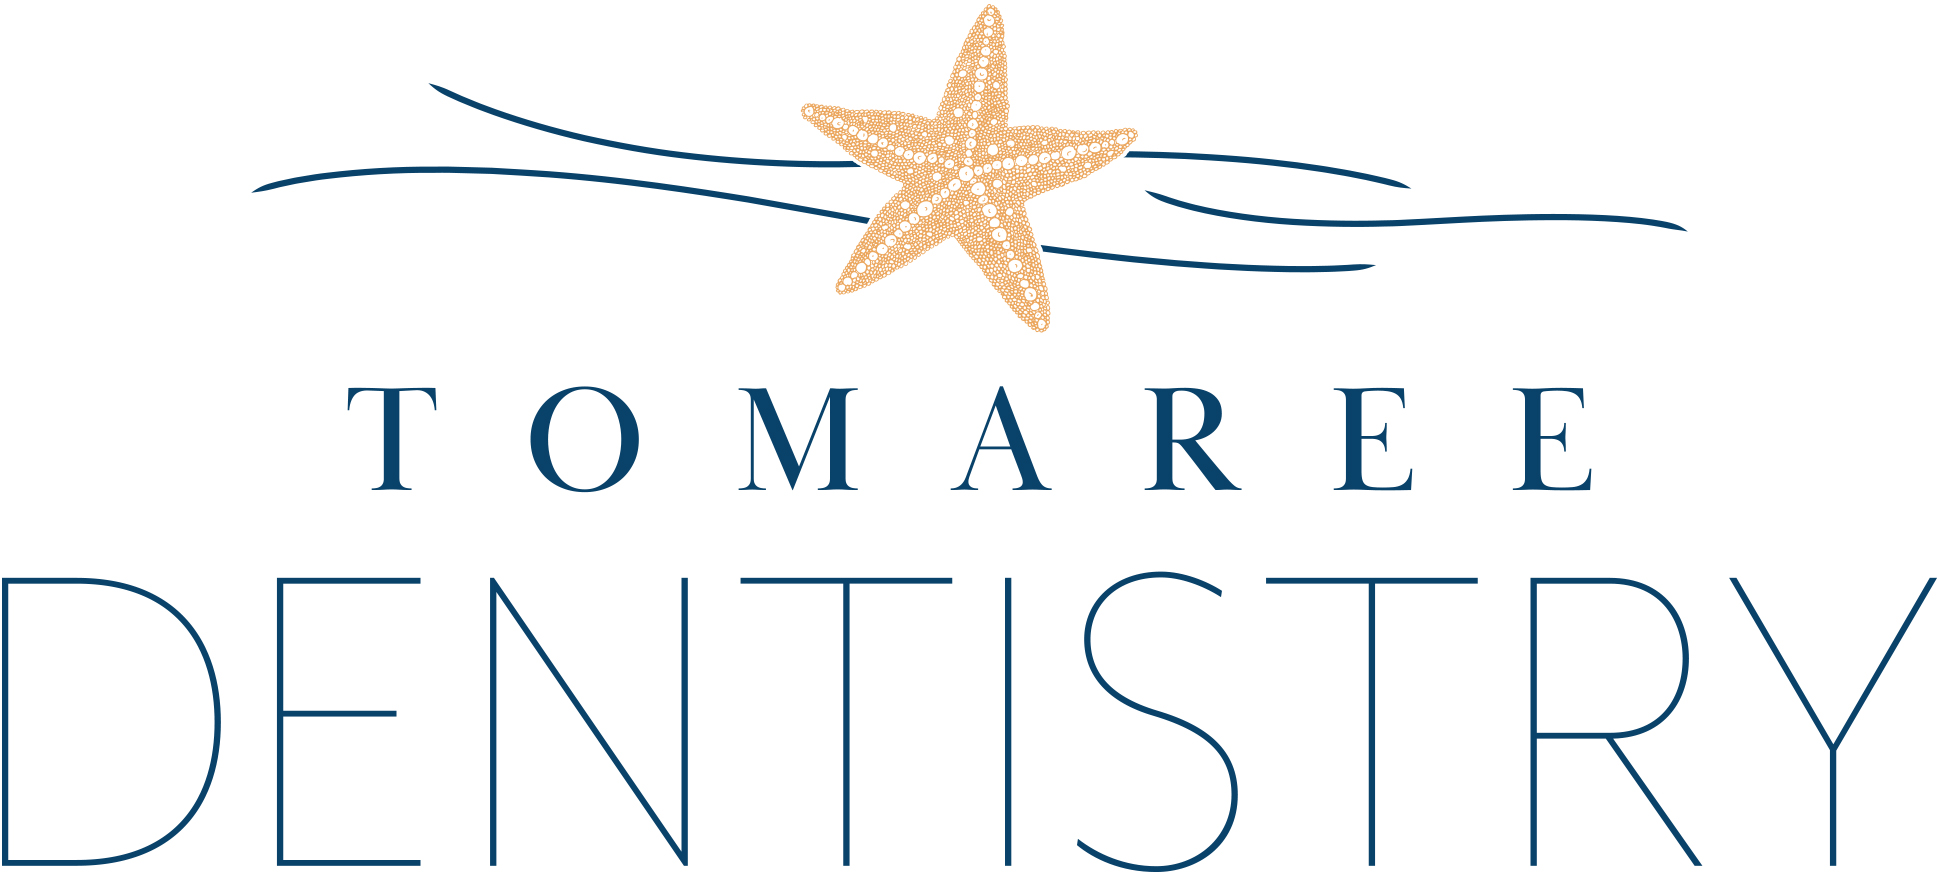 John Cropley Dentistry now called Tomaree Dentistry | 6 Tomaree St, Nelson Bay NSW 2315, Australia | Phone: (02) 4981 3114